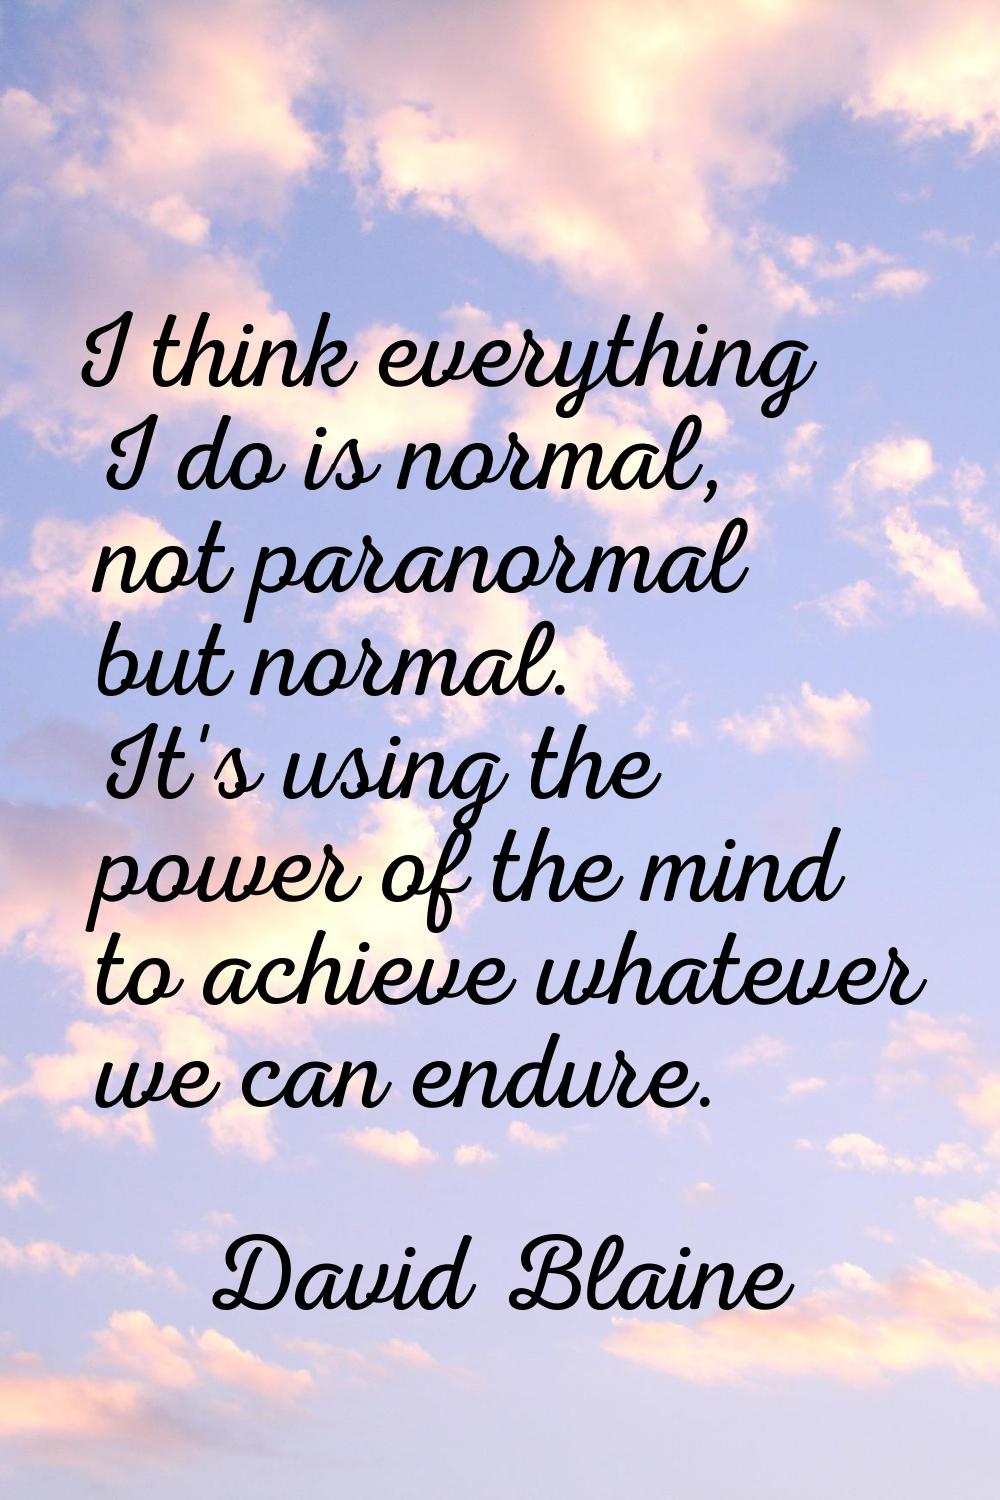 I think everything I do is normal, not paranormal but normal. It's using the power of the mind to a